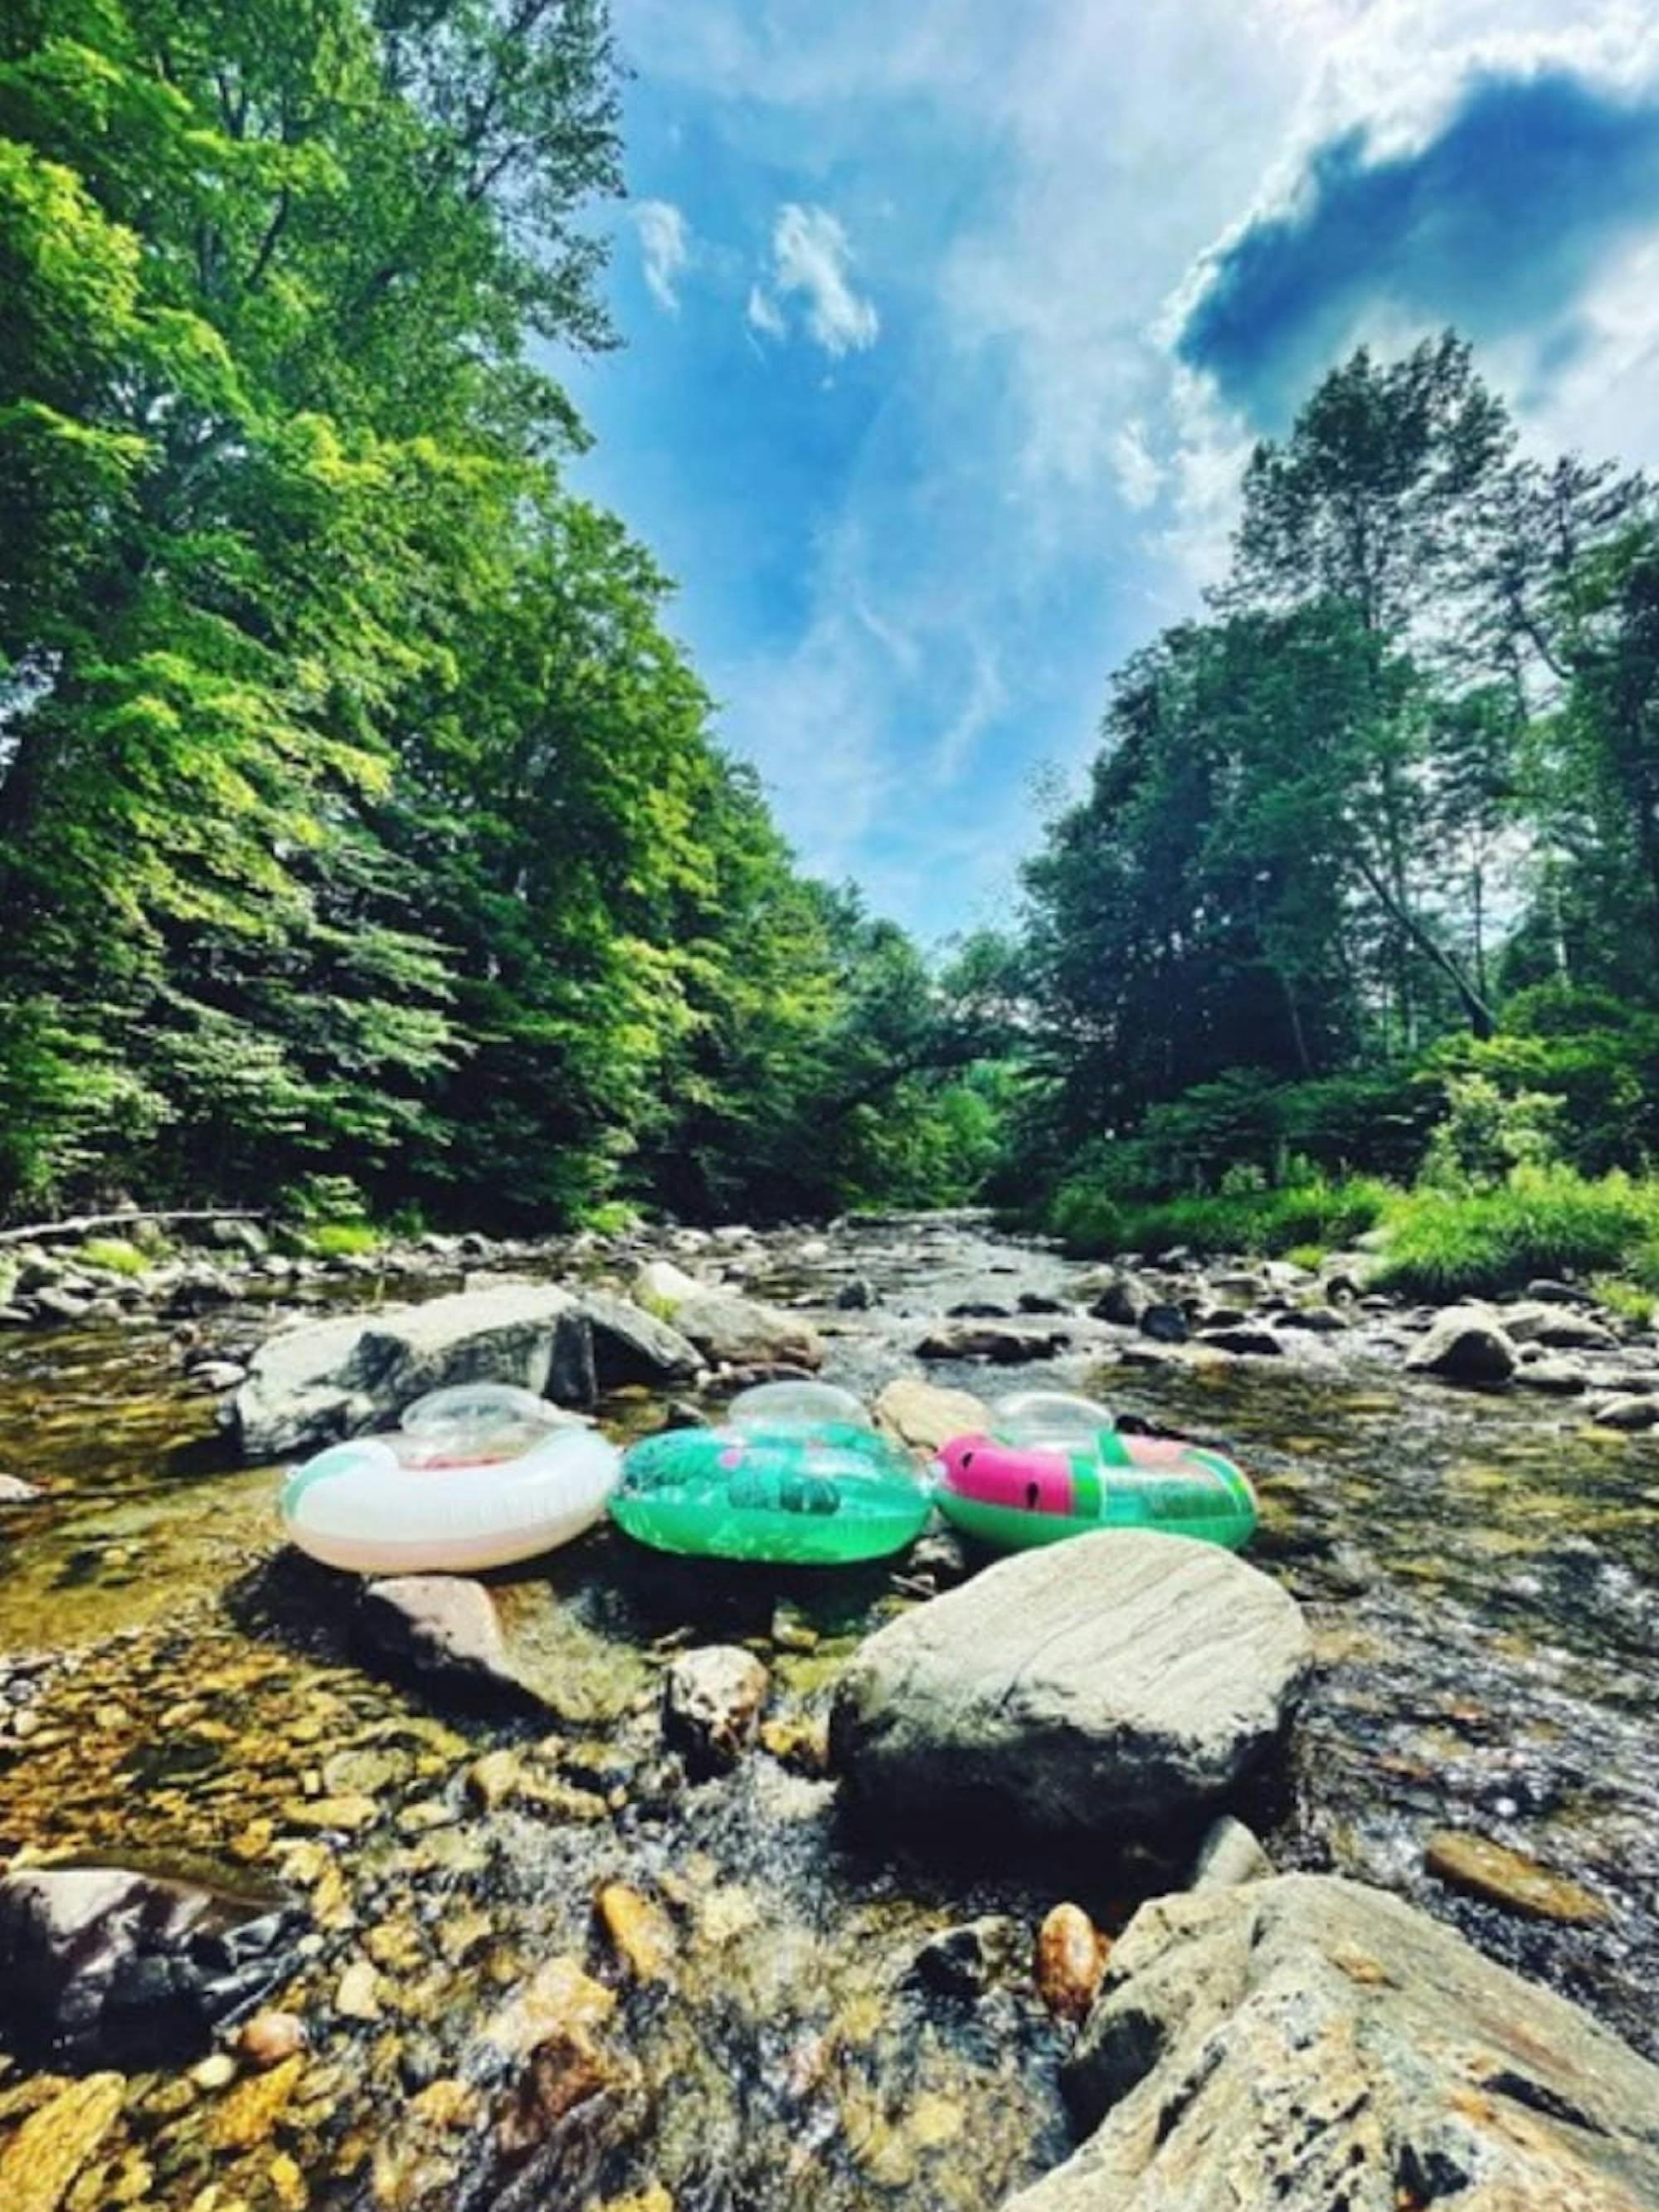 Saxtons River scene, with three inflatable tubes, green trees, a blue sky, and lots of rocks. It is the picture of a happy summer day!